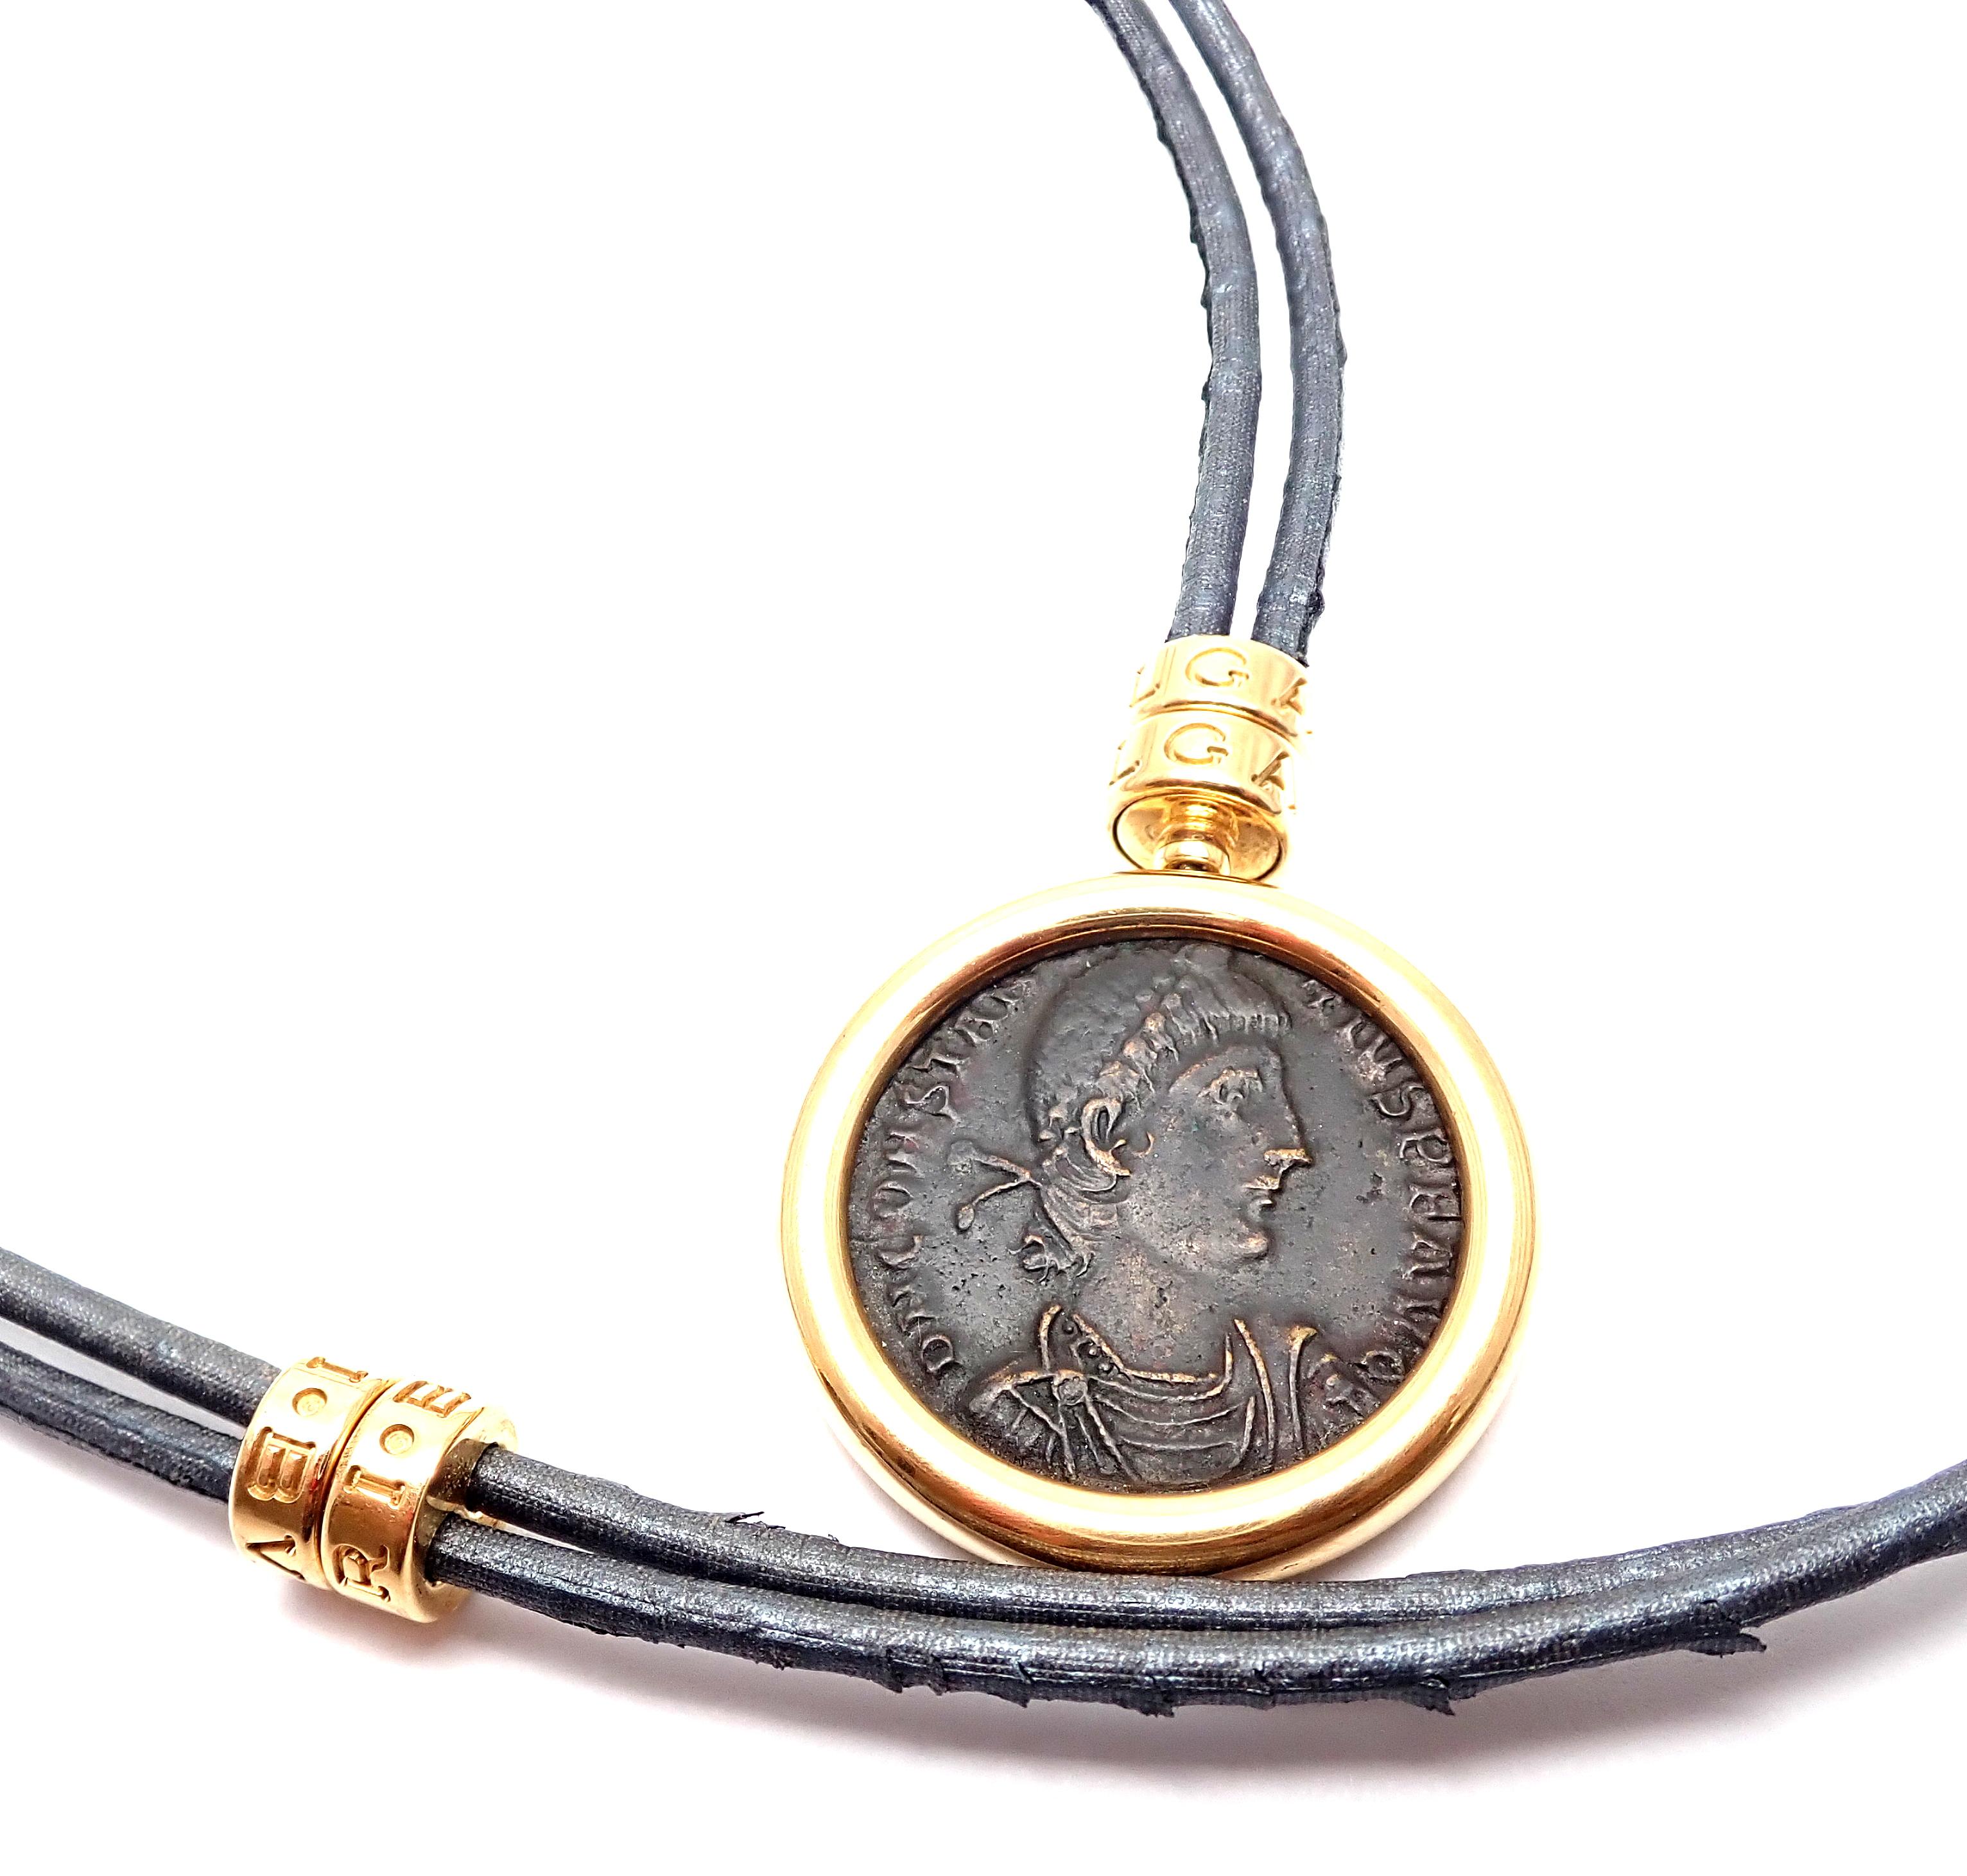 18k yellow gold ancient Roman coin black lace pendant necklace by Bulgari.
With 1 Thessalonica - Constantivus II AUG. A.D. 337-361
Details:
Chain Length: 27